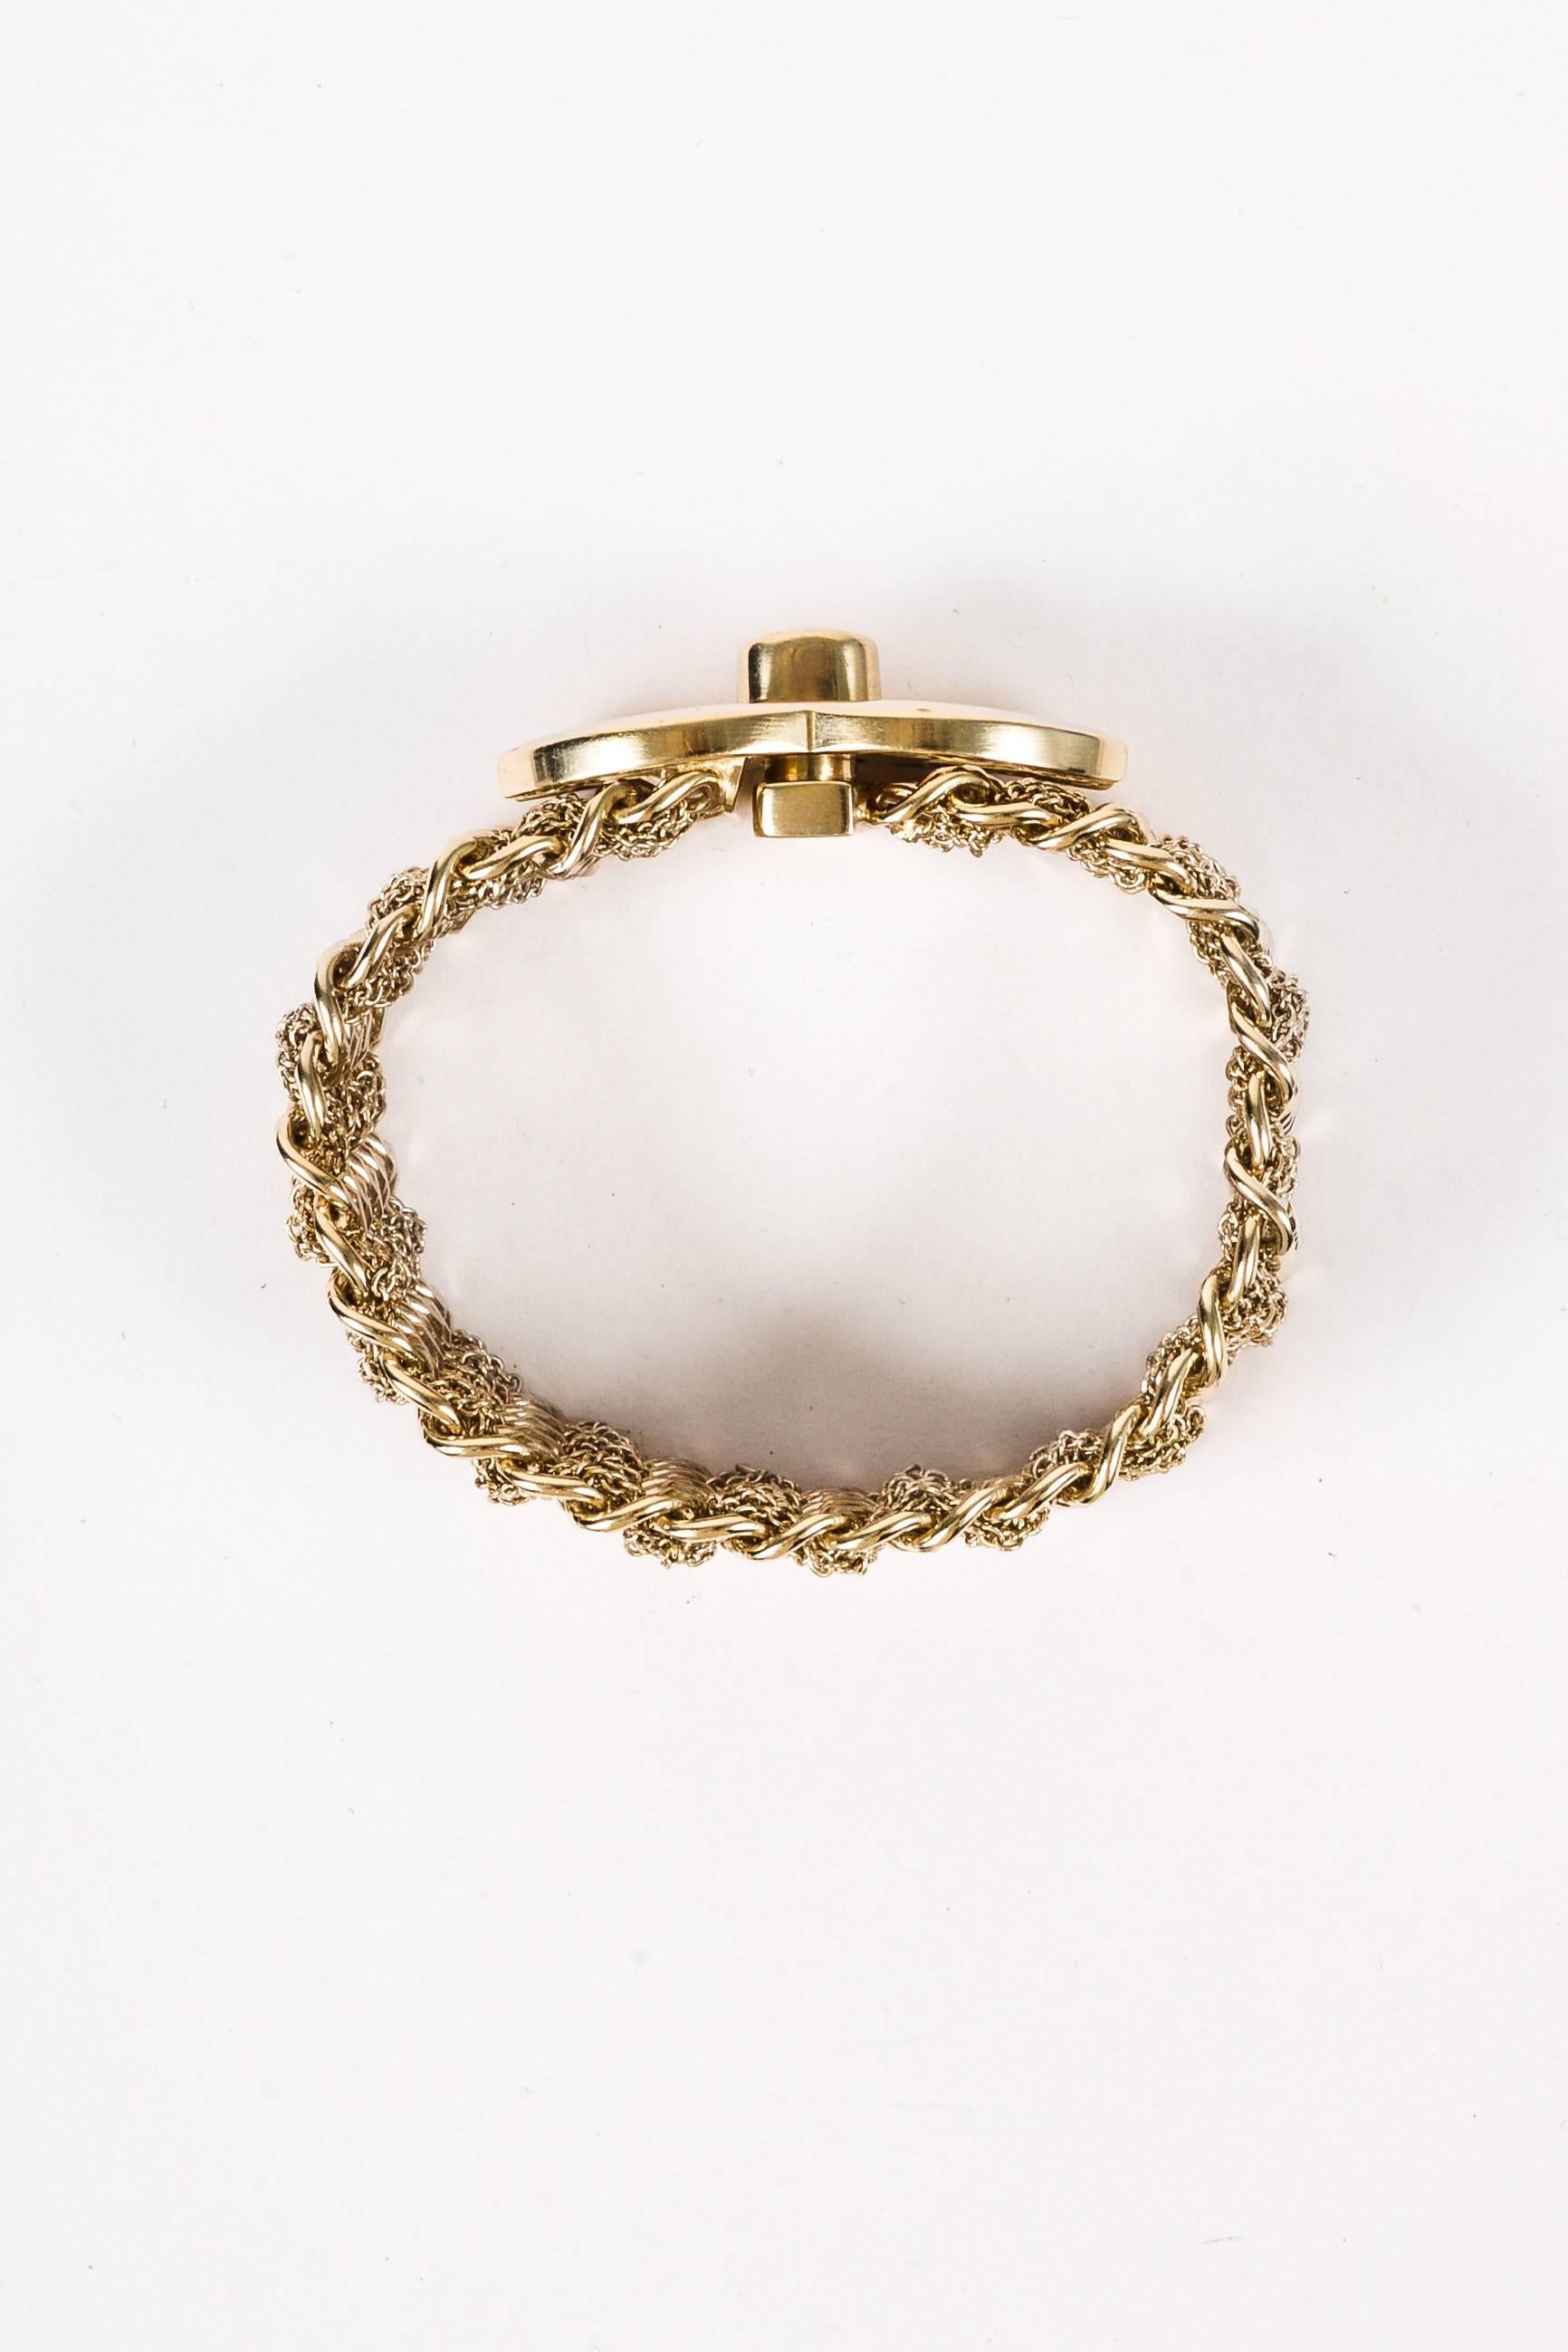 Comes in dust bag. Circa 2012, this versatile chain bracelet features gold-tone links with daintier strands woven between each. Oversized 'CC' logo turn lock.

Measurements: Total Length 6.875